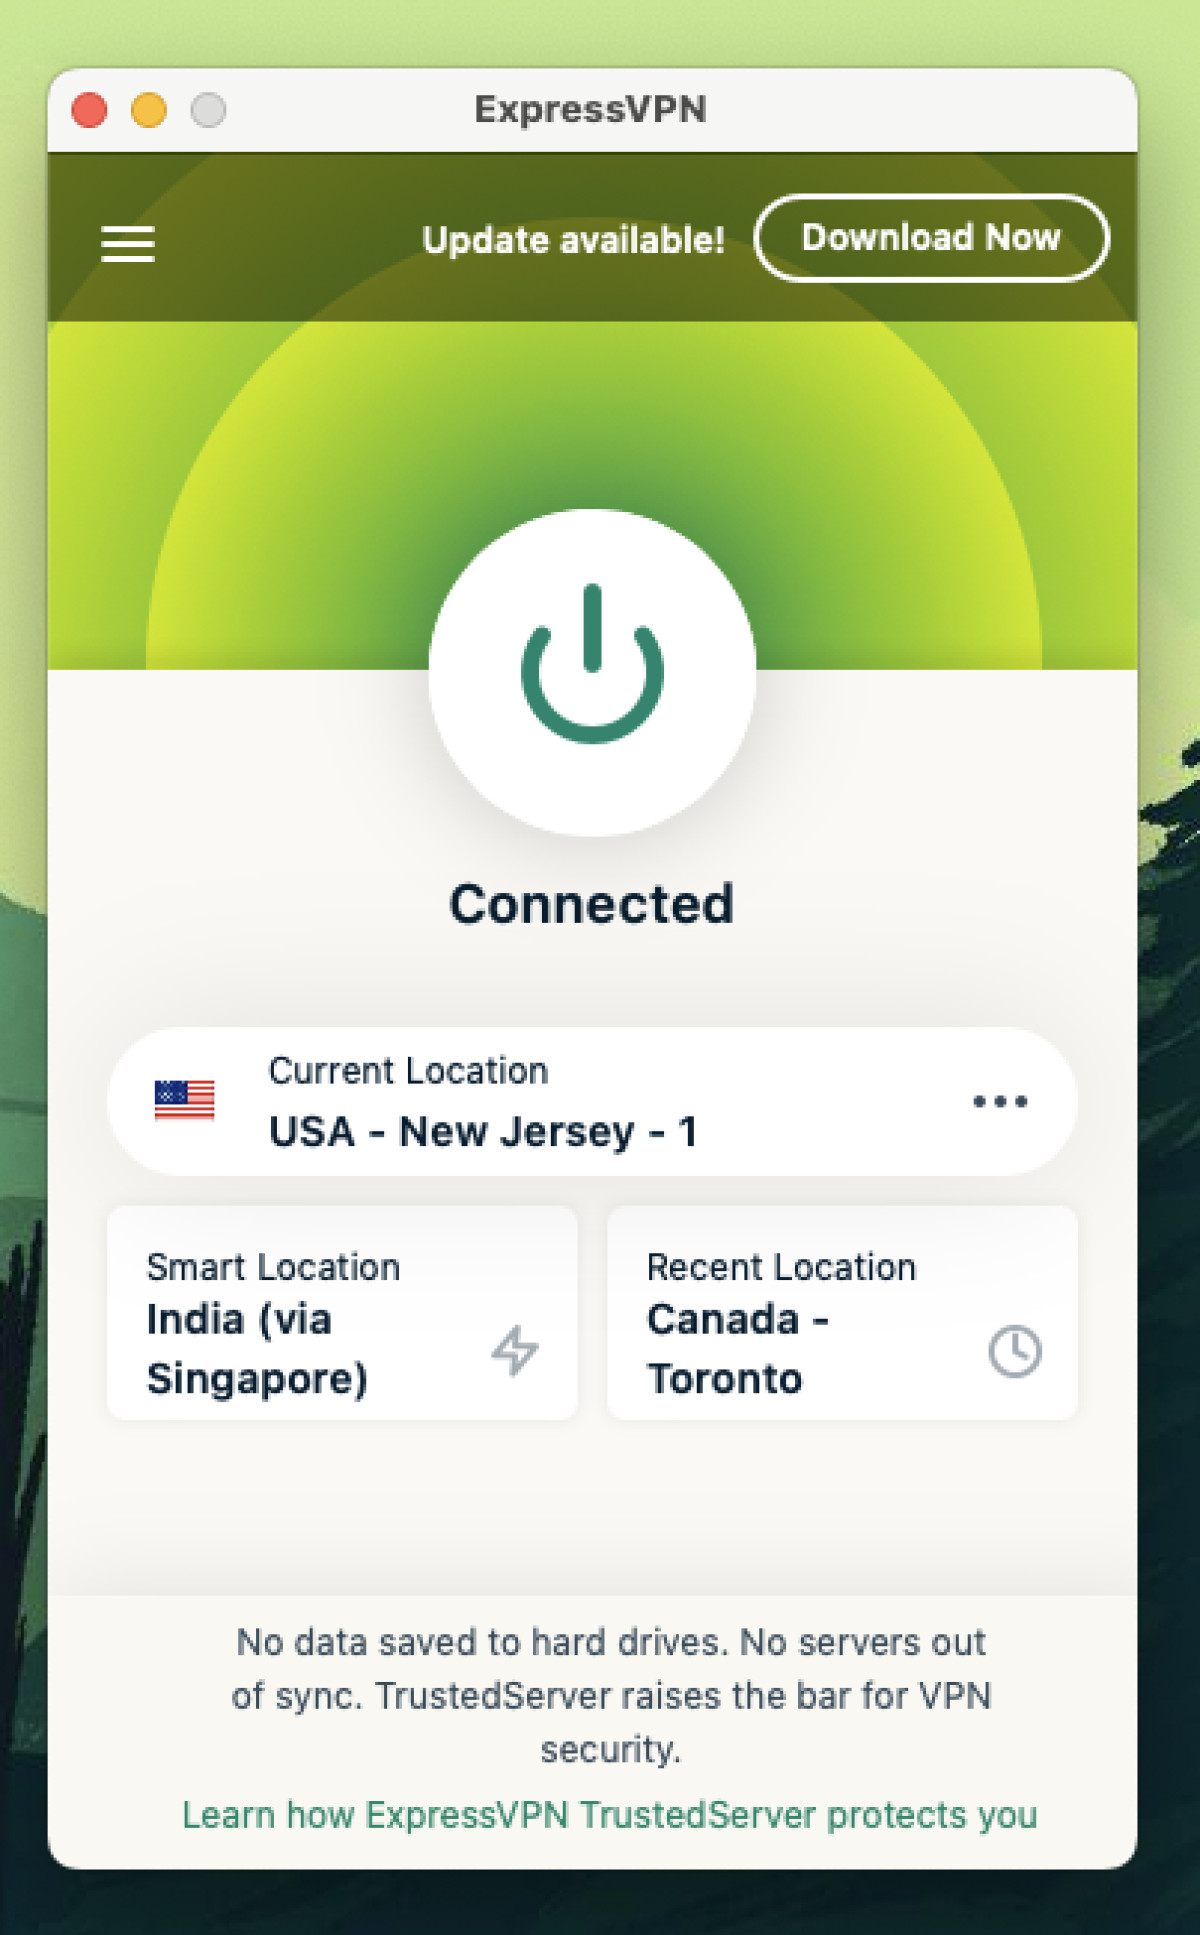 ExpressVPN connected to US servers